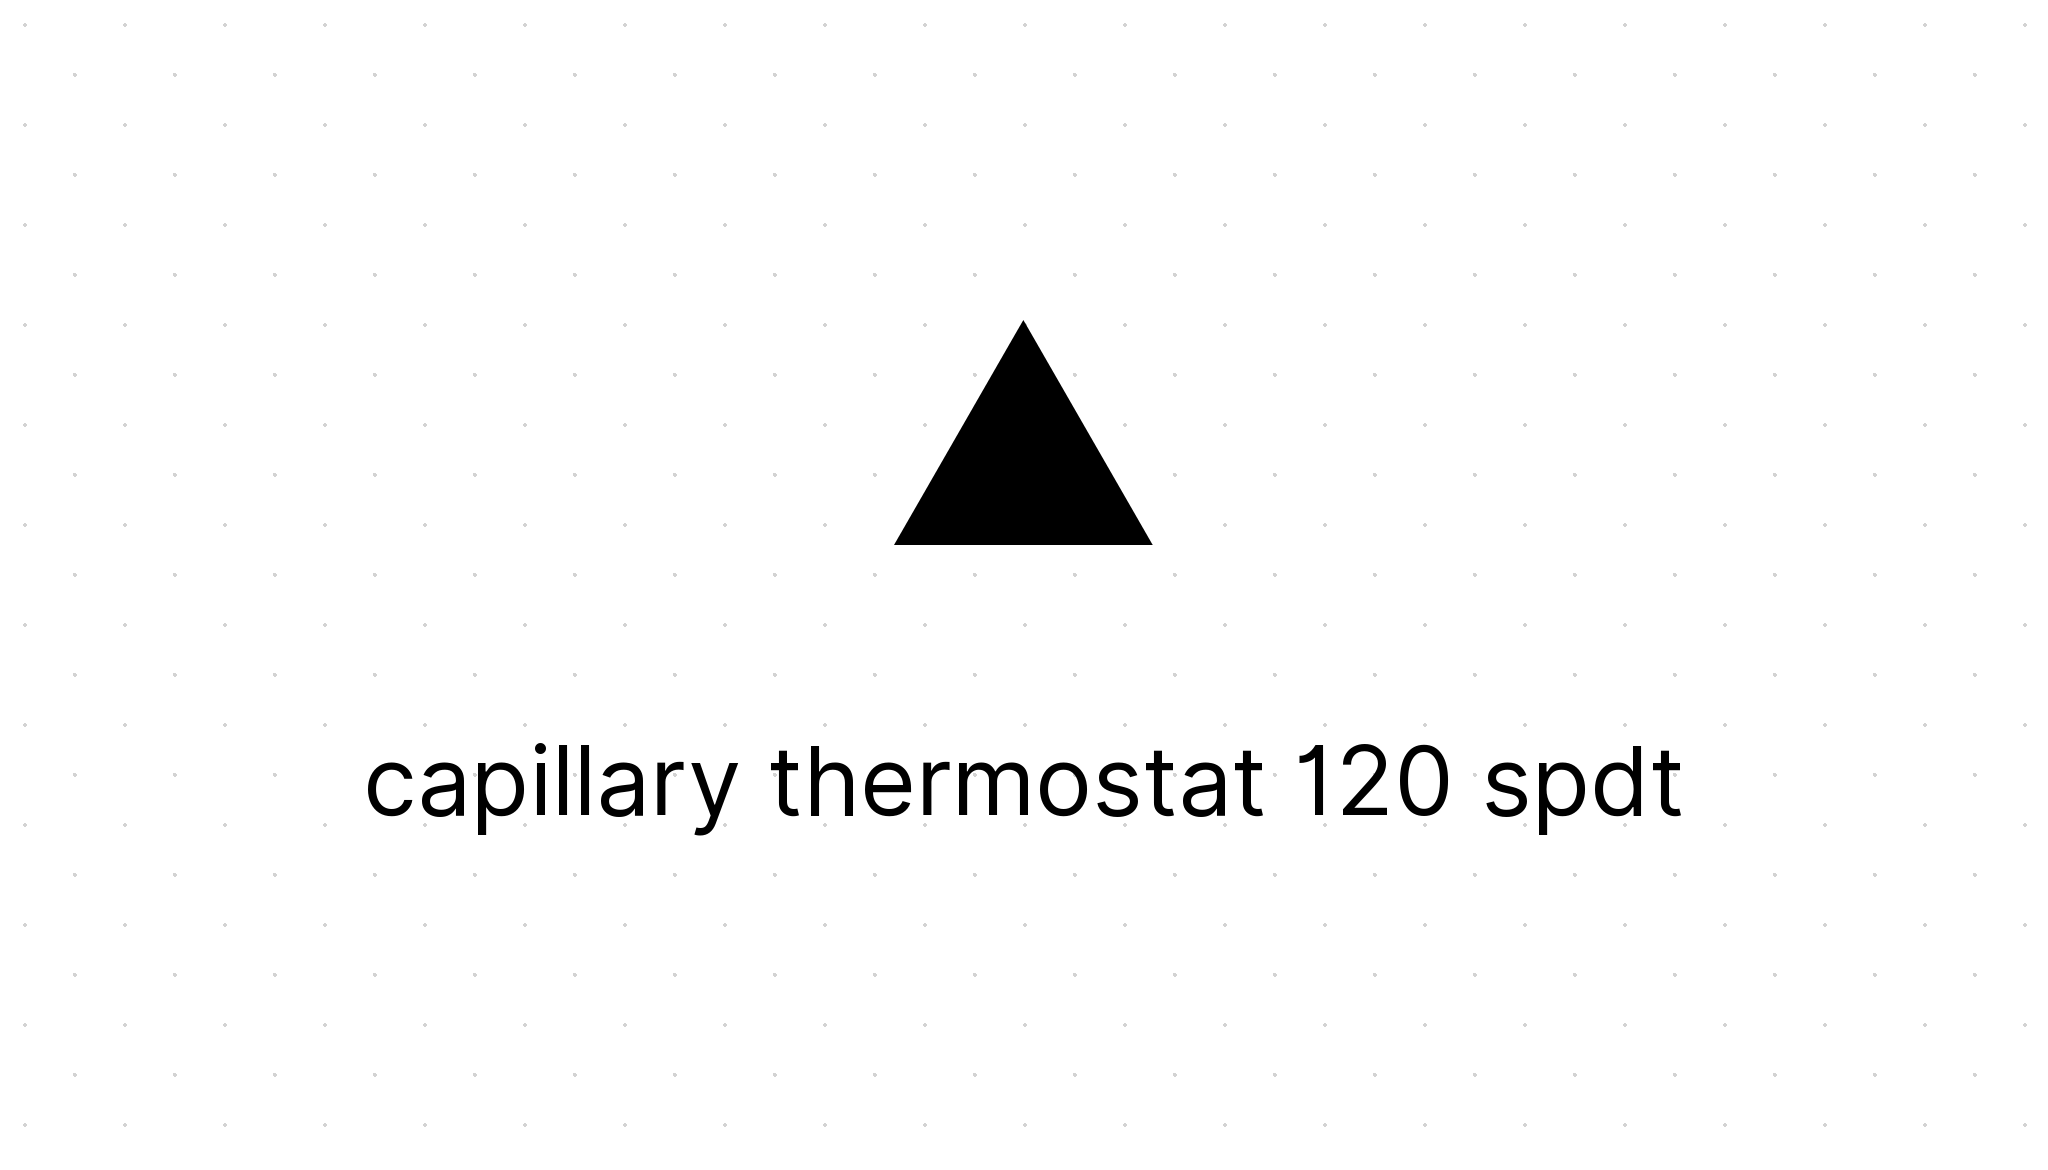 RS PRO Capillary Thermostat, +120°C Max, SPDT, Automatic Reset, Panel Mount